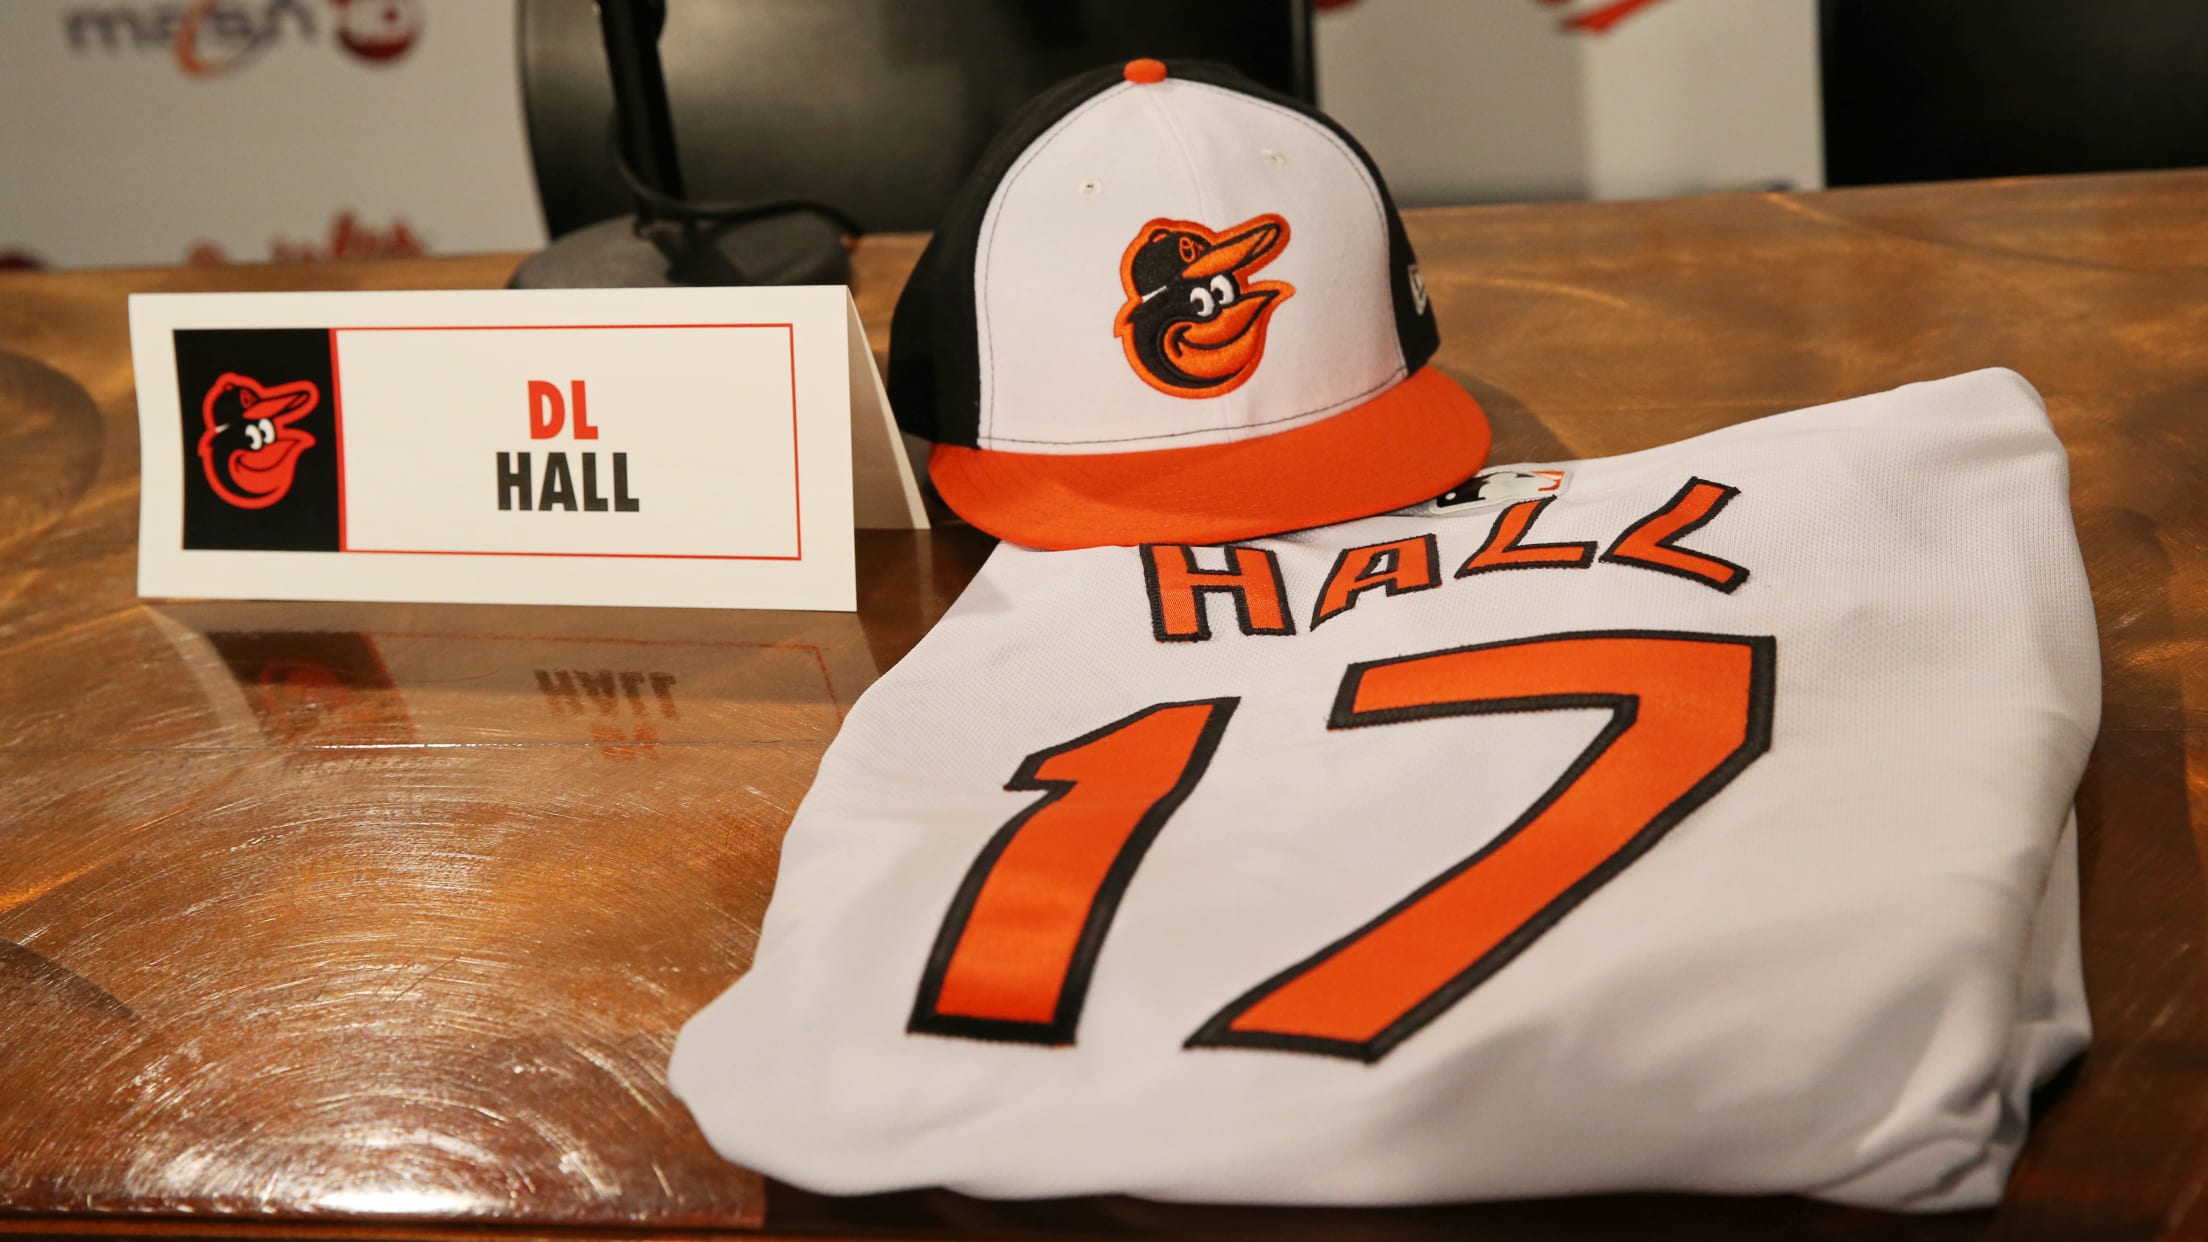 Hall's jersey and hat laid out during his draft press conference in 2017. Hall was drafted as the 21st pick in the first round by the Orioles.